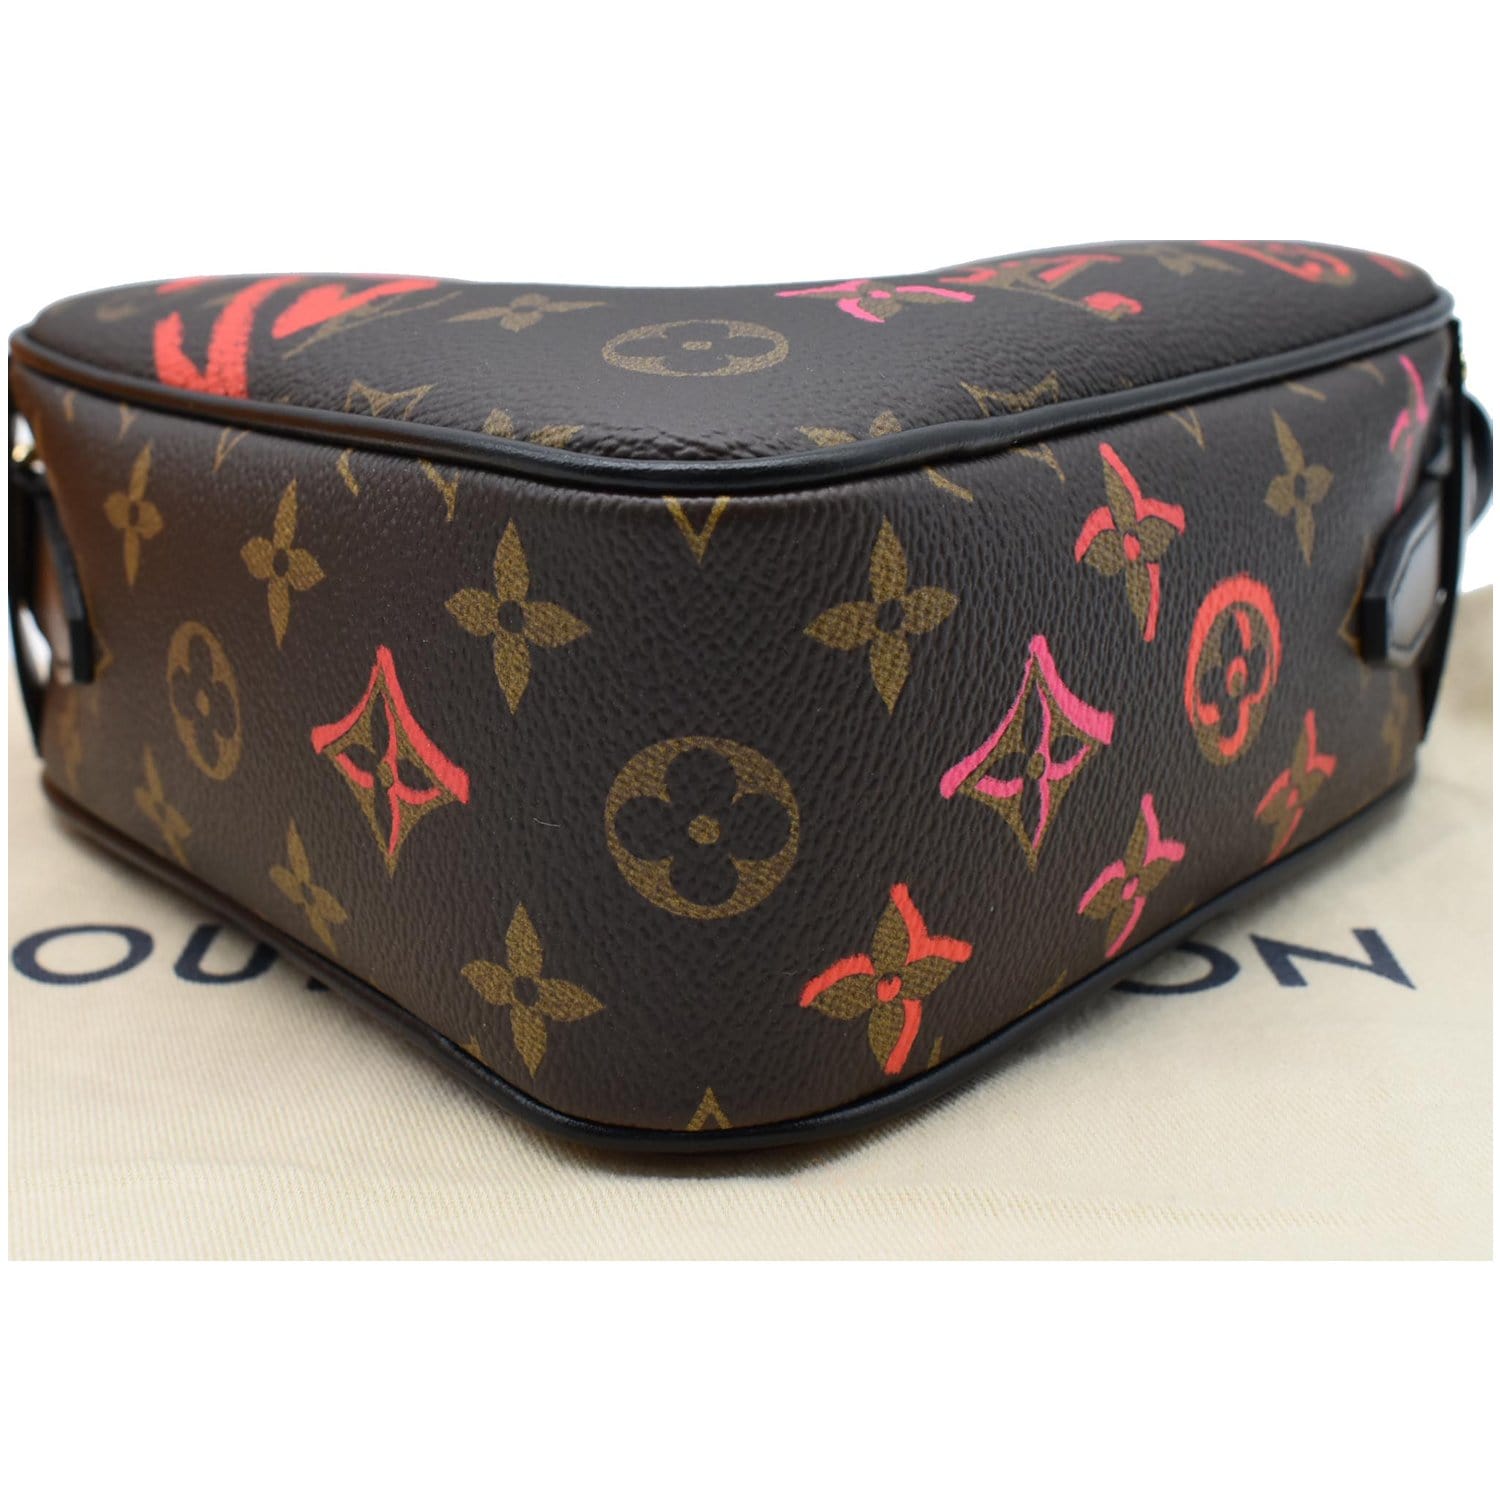 Louis Vuitton Limited Edition Brown Monogram Coated Canvas Sac Coeur Heart Bag with Gold Hardware